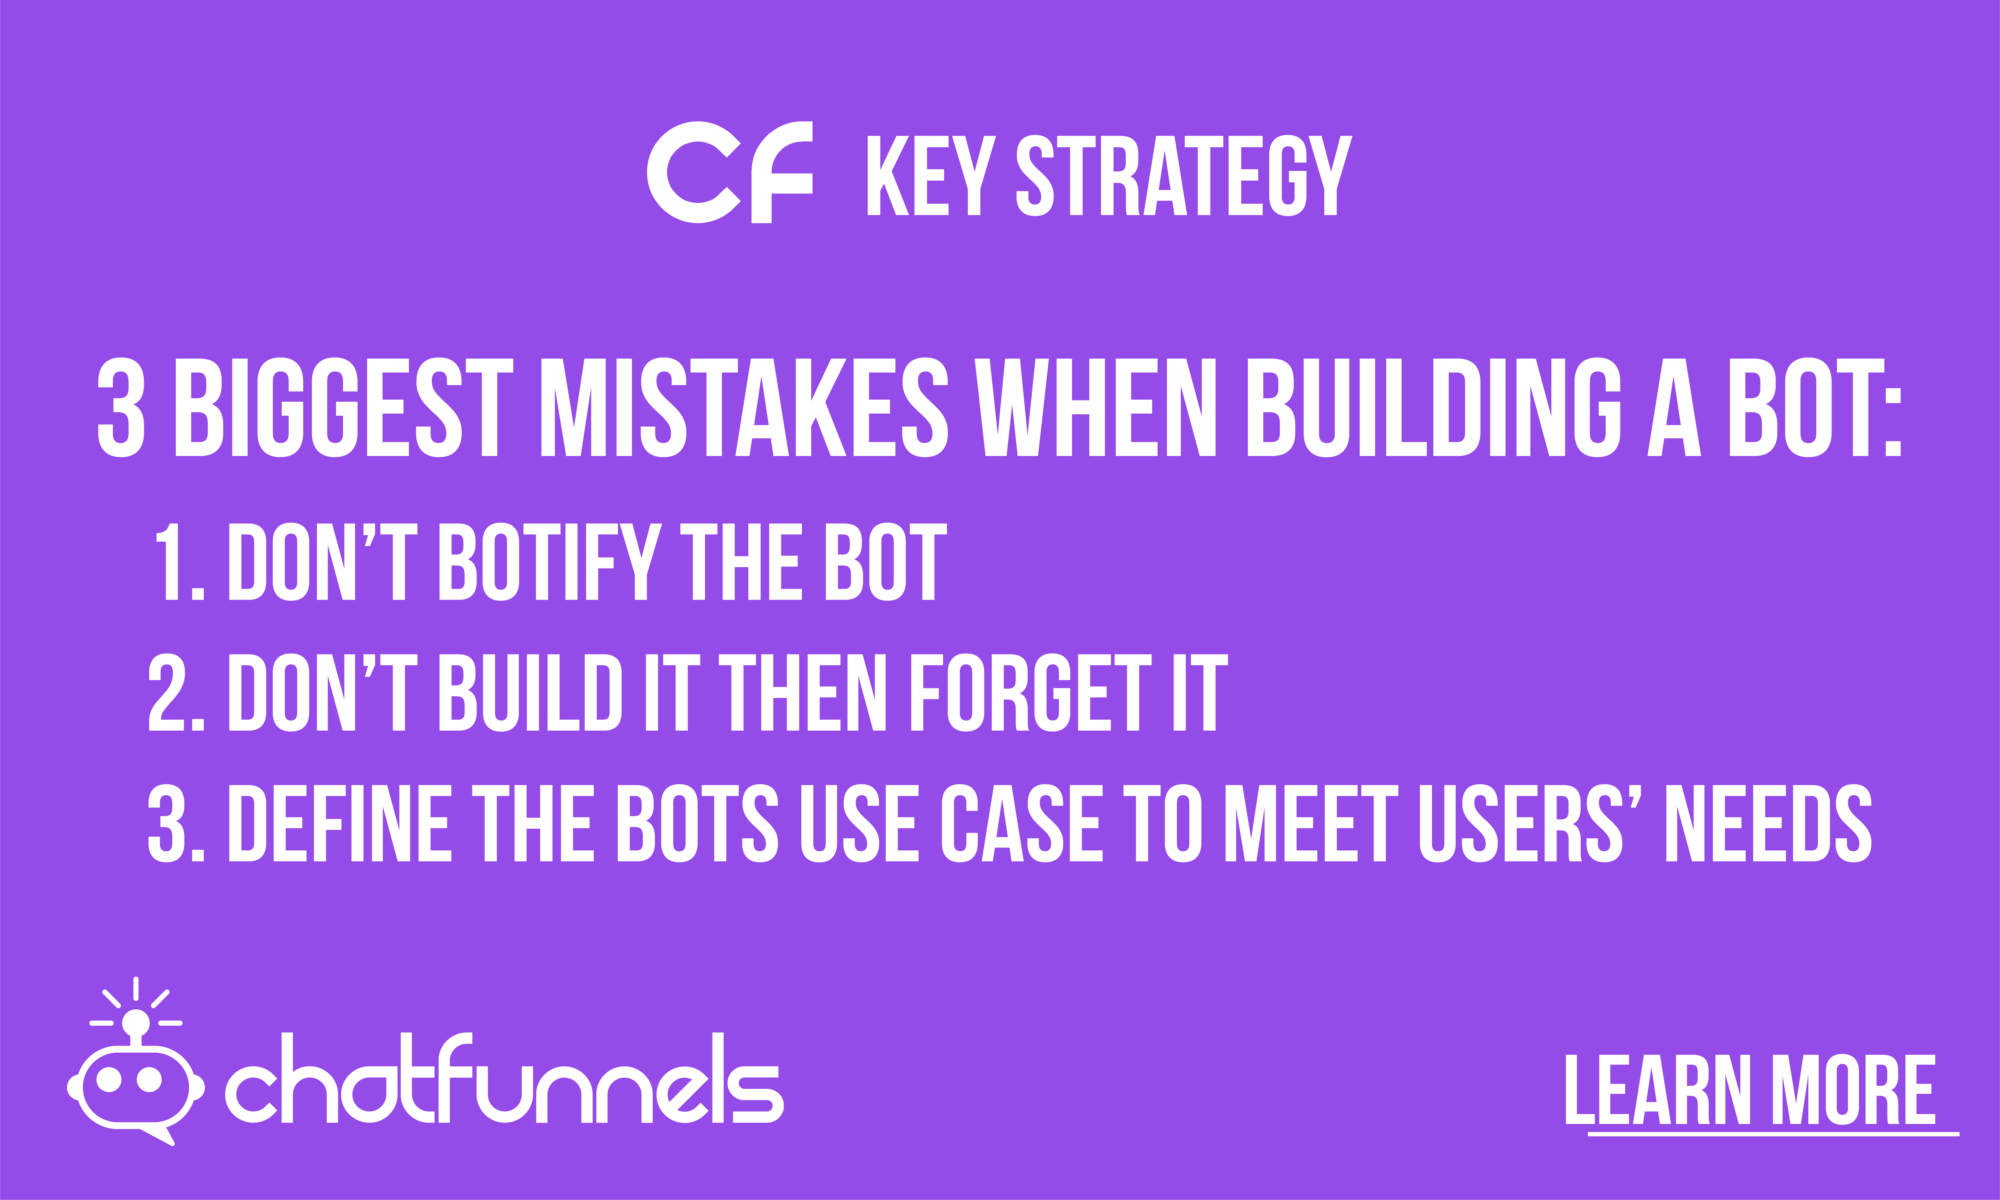 3 Biggest Mistakes when Building a Bot